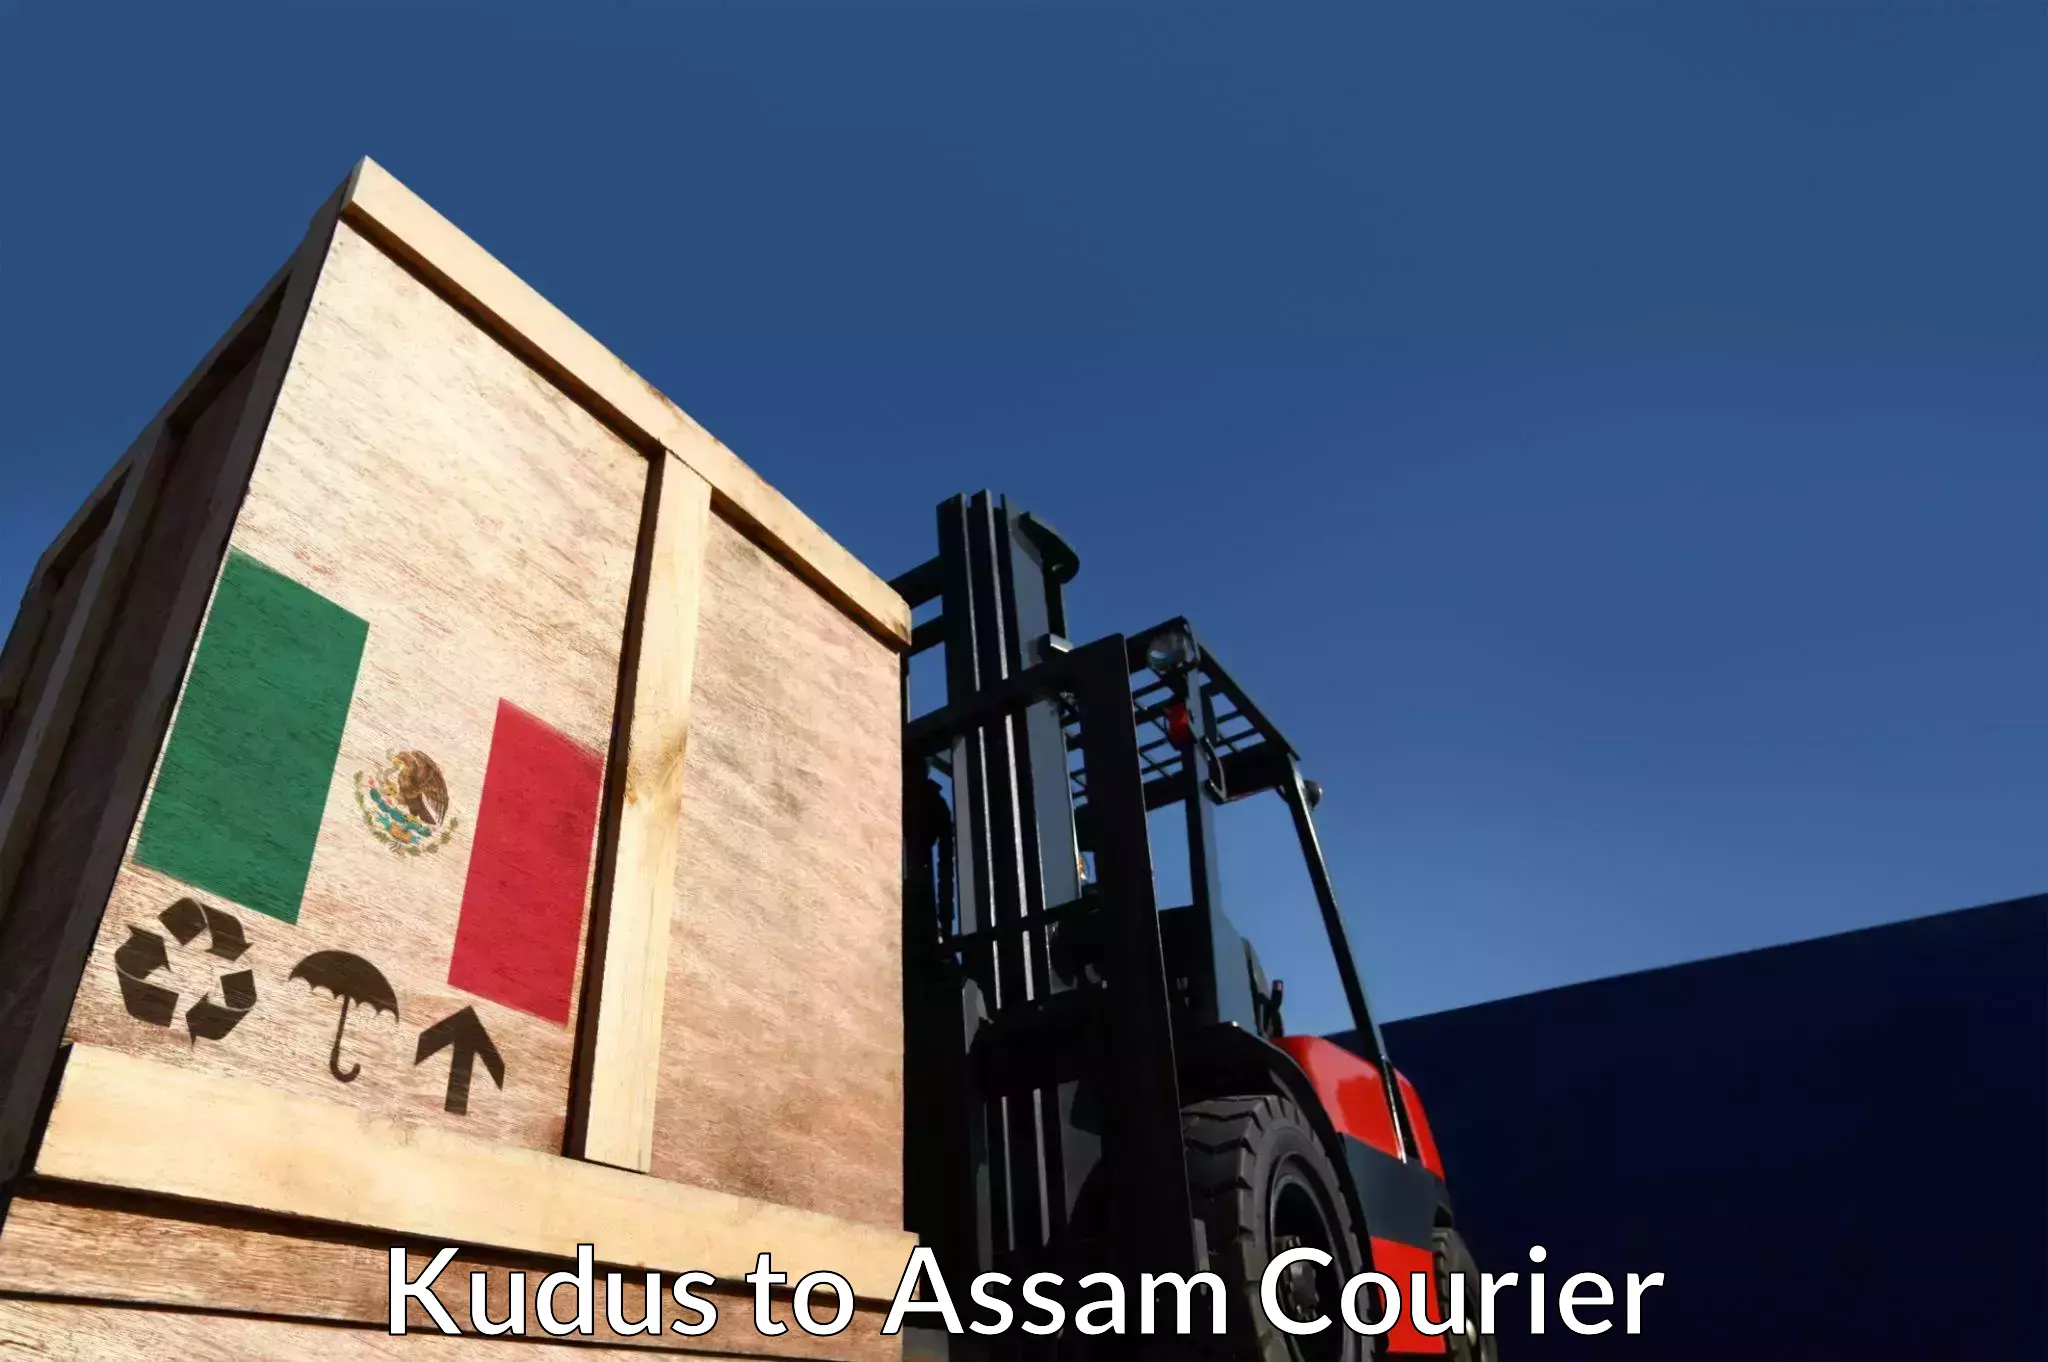 Advanced tracking systems Kudus to Lala Assam